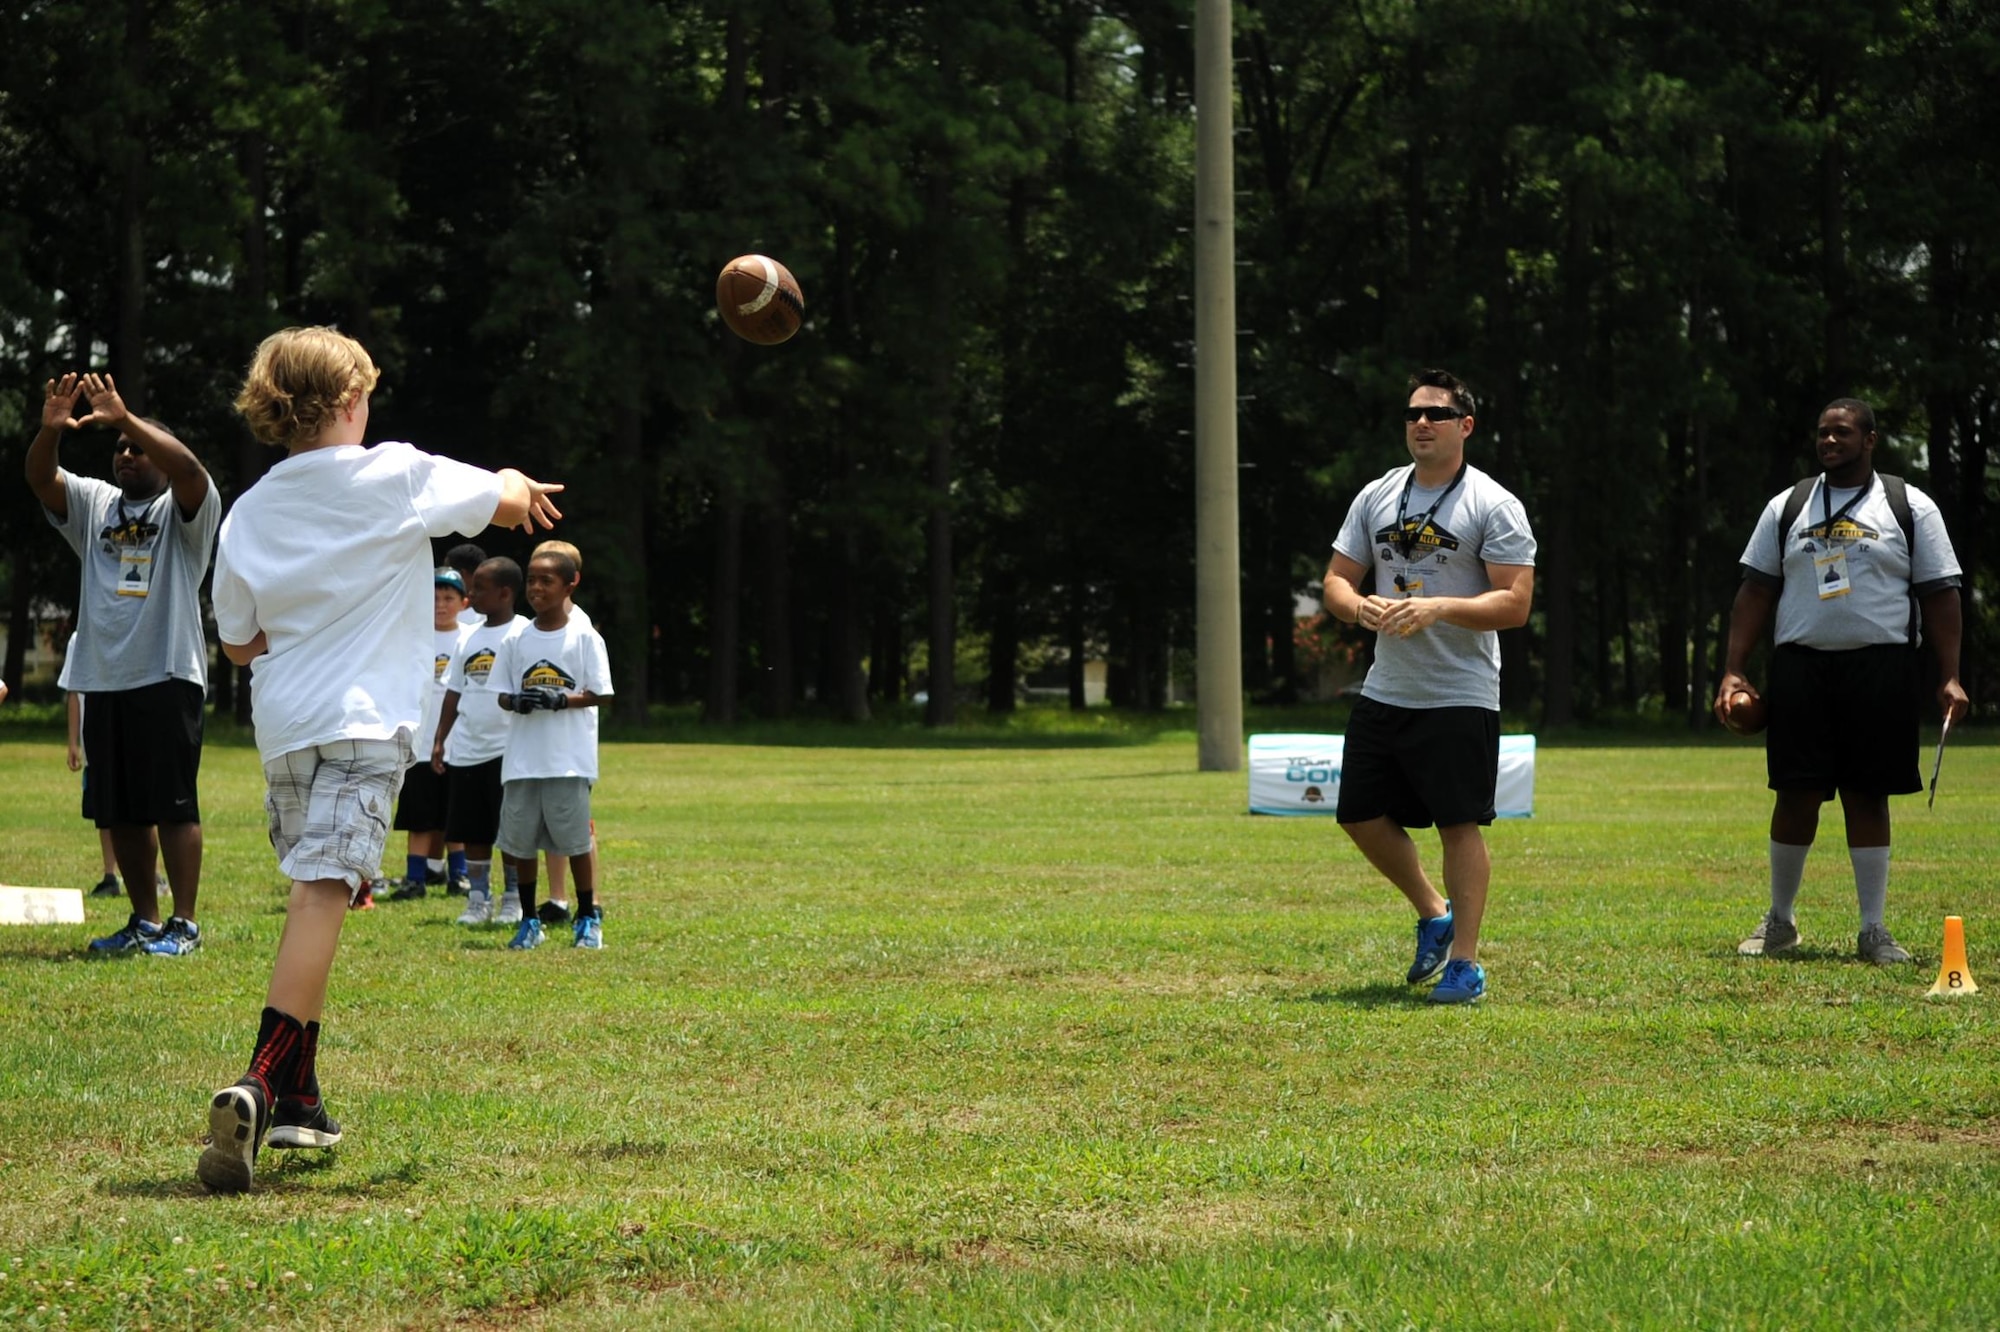 A young athlete practices passing drills with a volunteer coach during a National Football League ProCamp, July 16, 2015, at Seymour Johnson Air Force Base, N.C. More than 100 children turned out for the two-day camp. (U.S. Air Force photo/Senior Airman Ashley J. Thum)